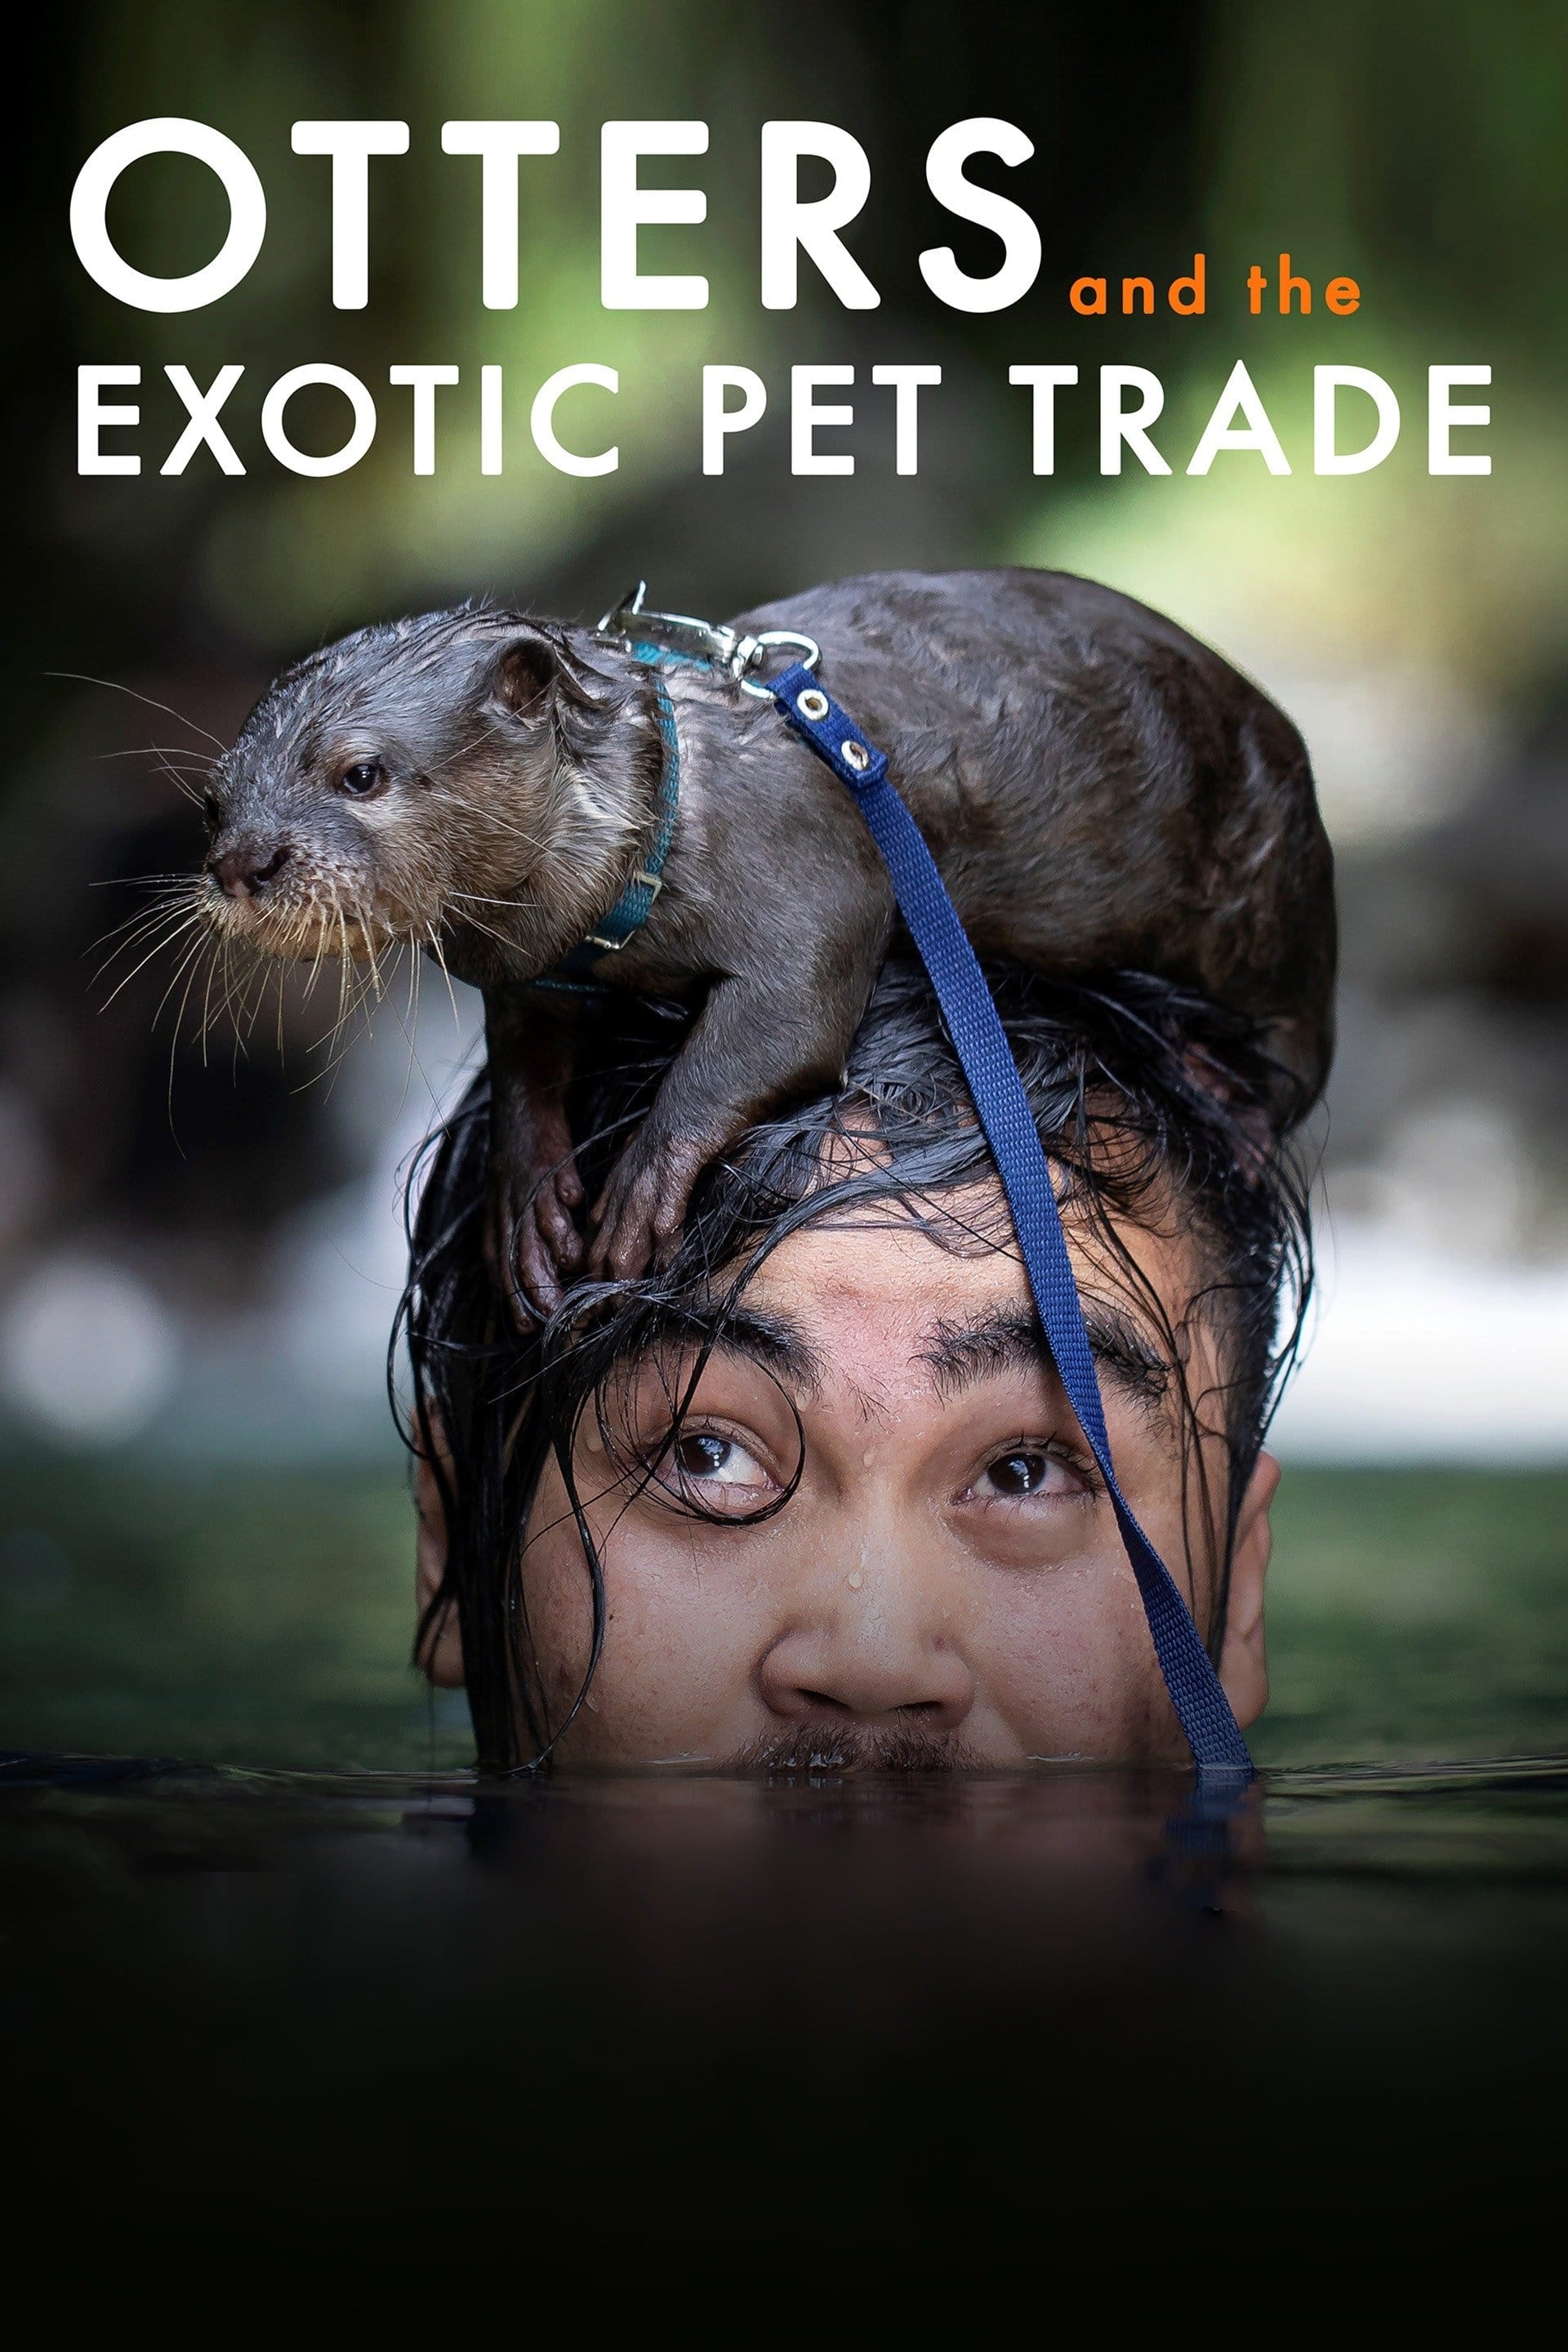 Otters and the Exotic Pet Trade